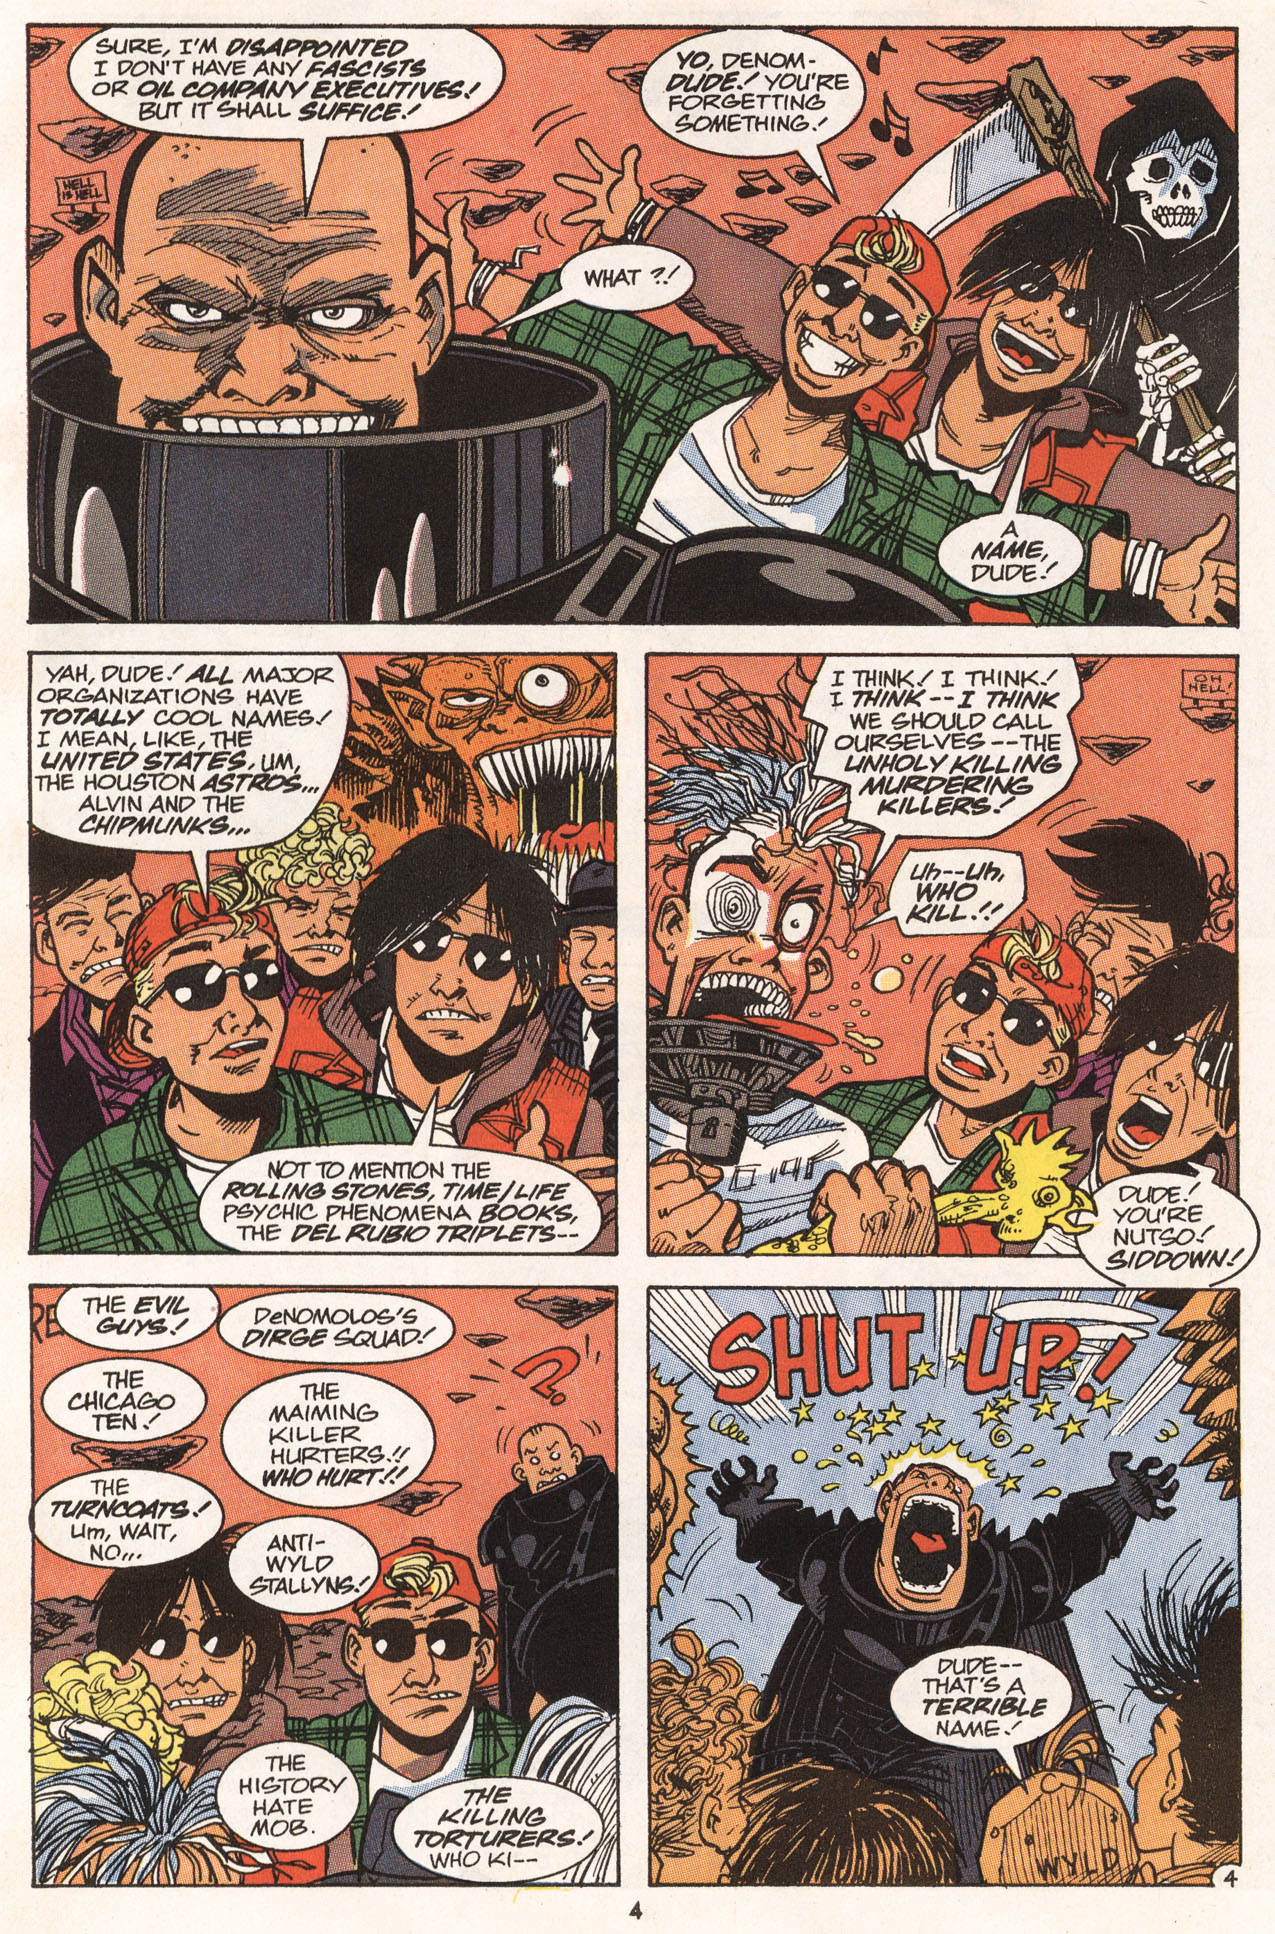 Read online Bill & Ted's Excellent Comic Book comic -  Issue #6 - 5